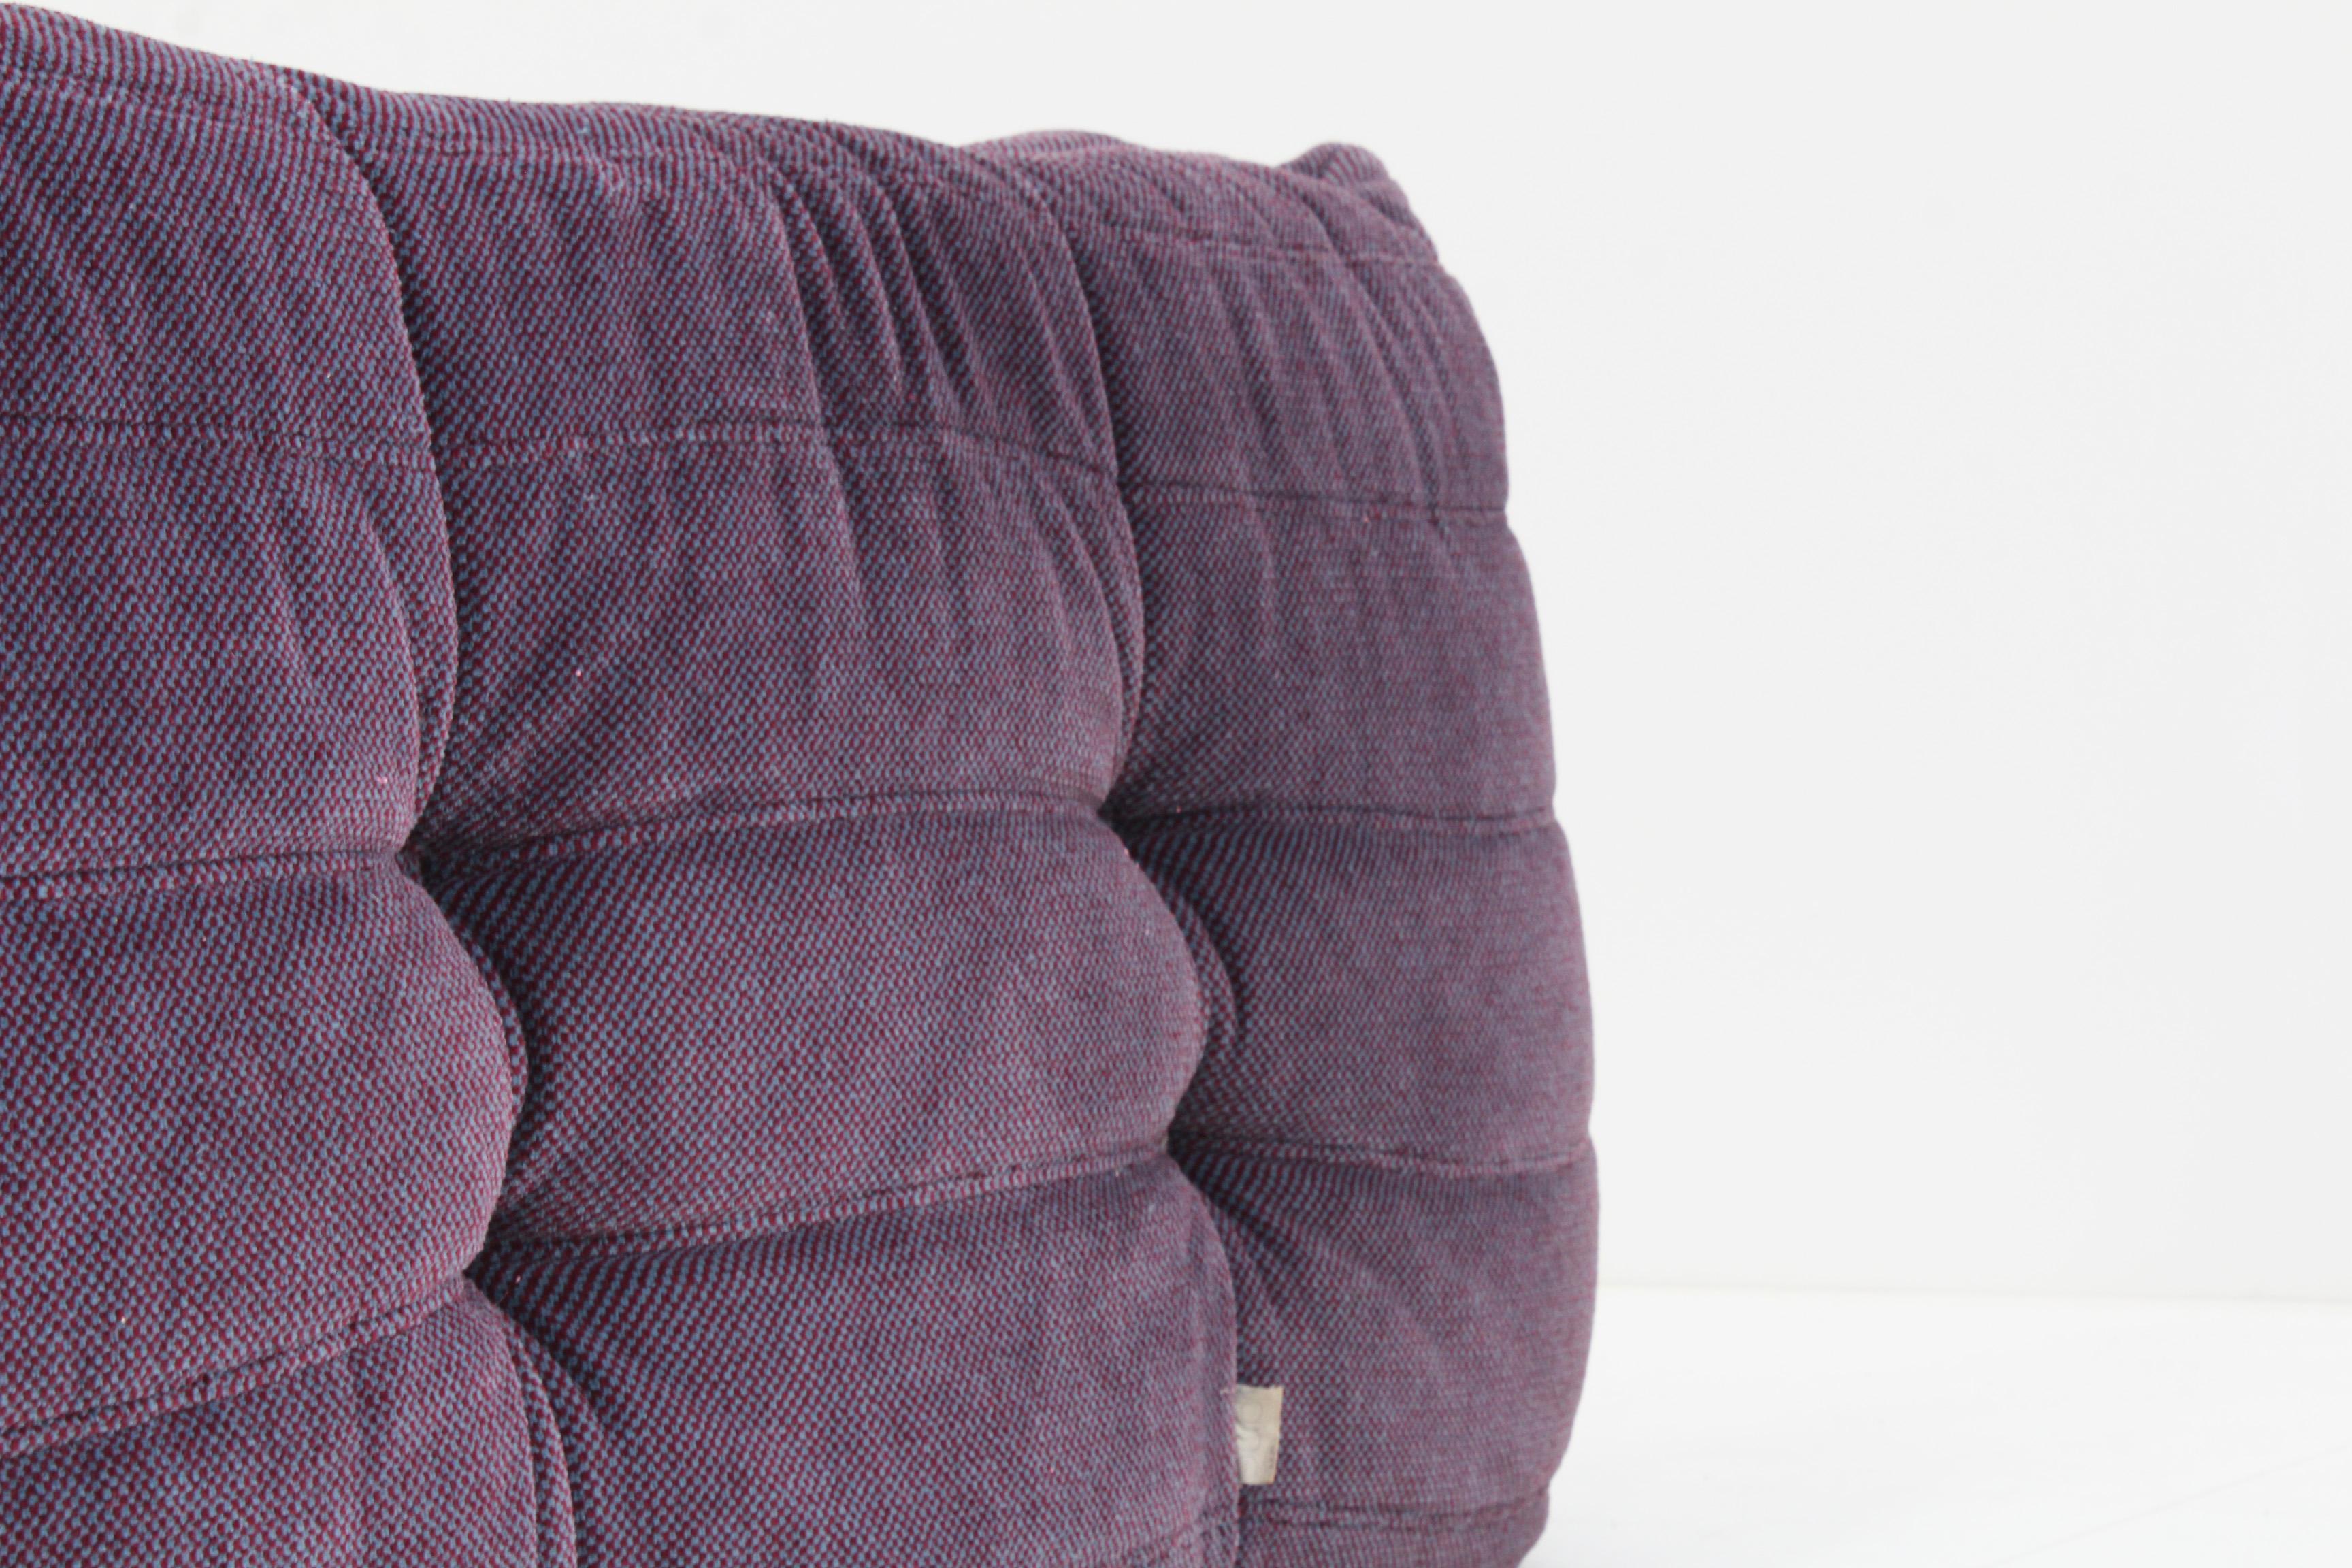 Original vintage Togo 2 seater sofa  by Ligne Roset designed by Michel Ducaroy. This is an original togo sofa in purple fabric. No reupholstery. The fabric and foam are in a good vintage condition, some signs of wear appropriate with age.
